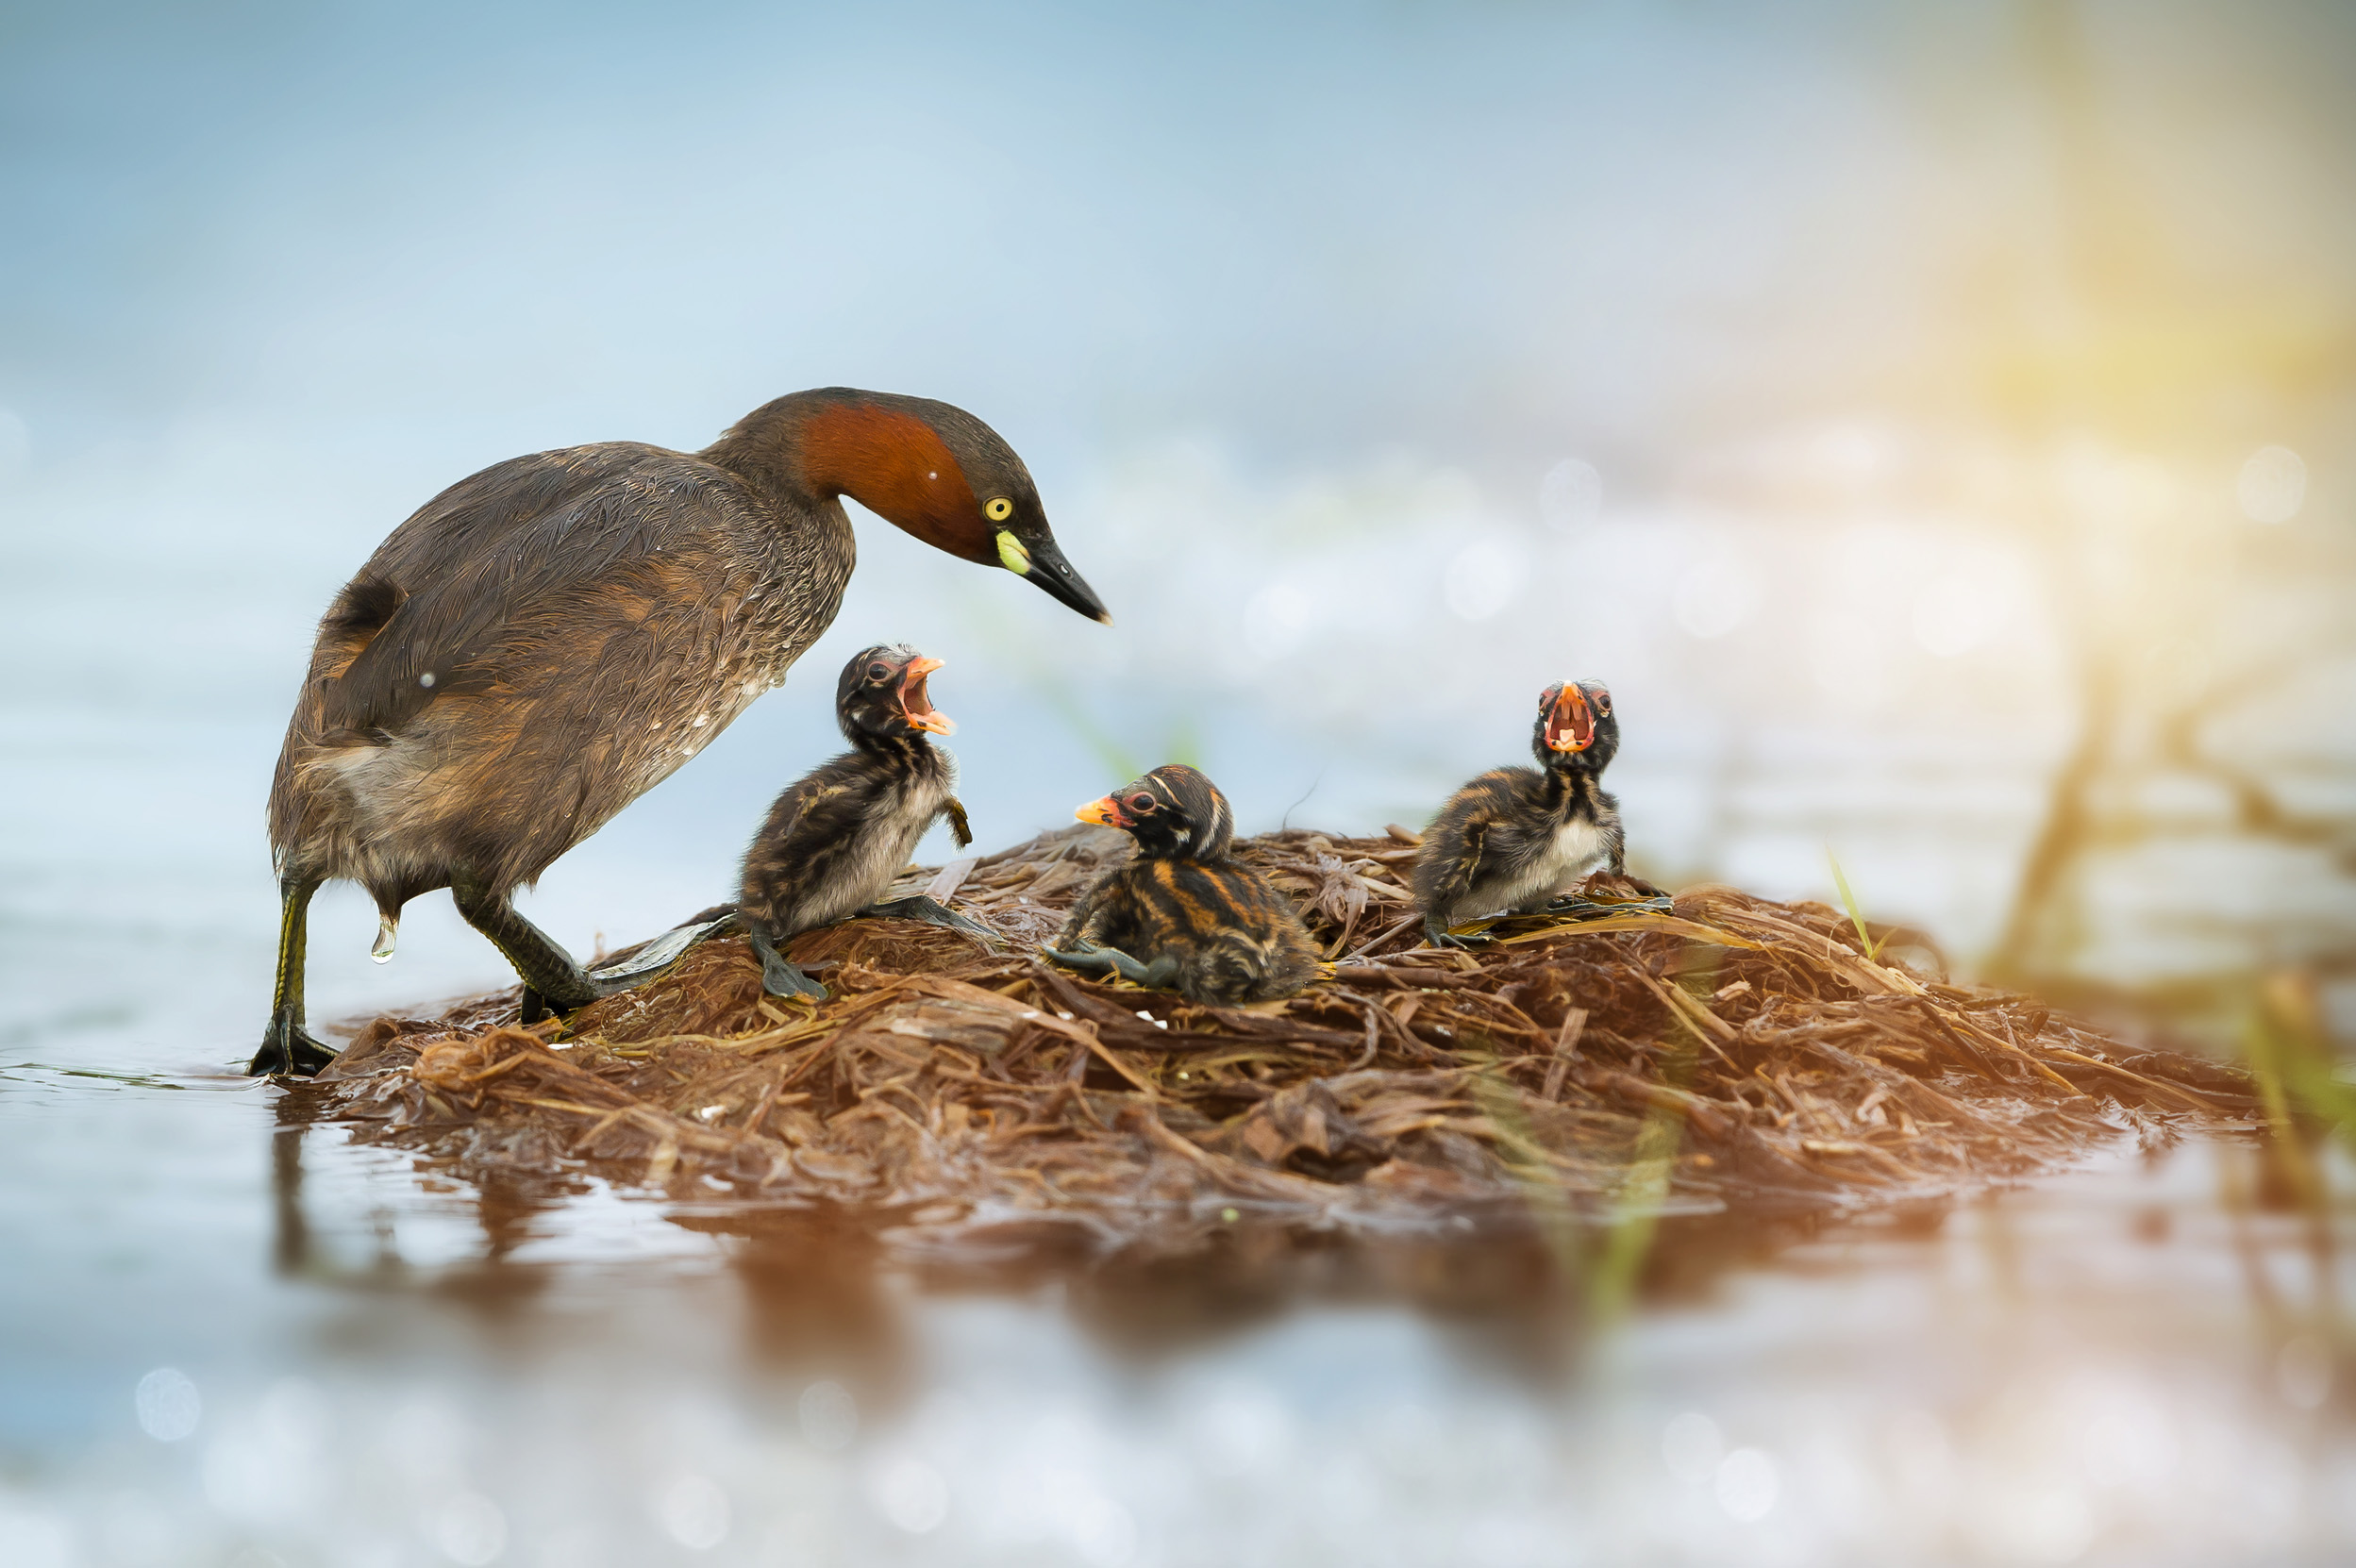 Little Grebe in summer plumage with their chicks in a nest.